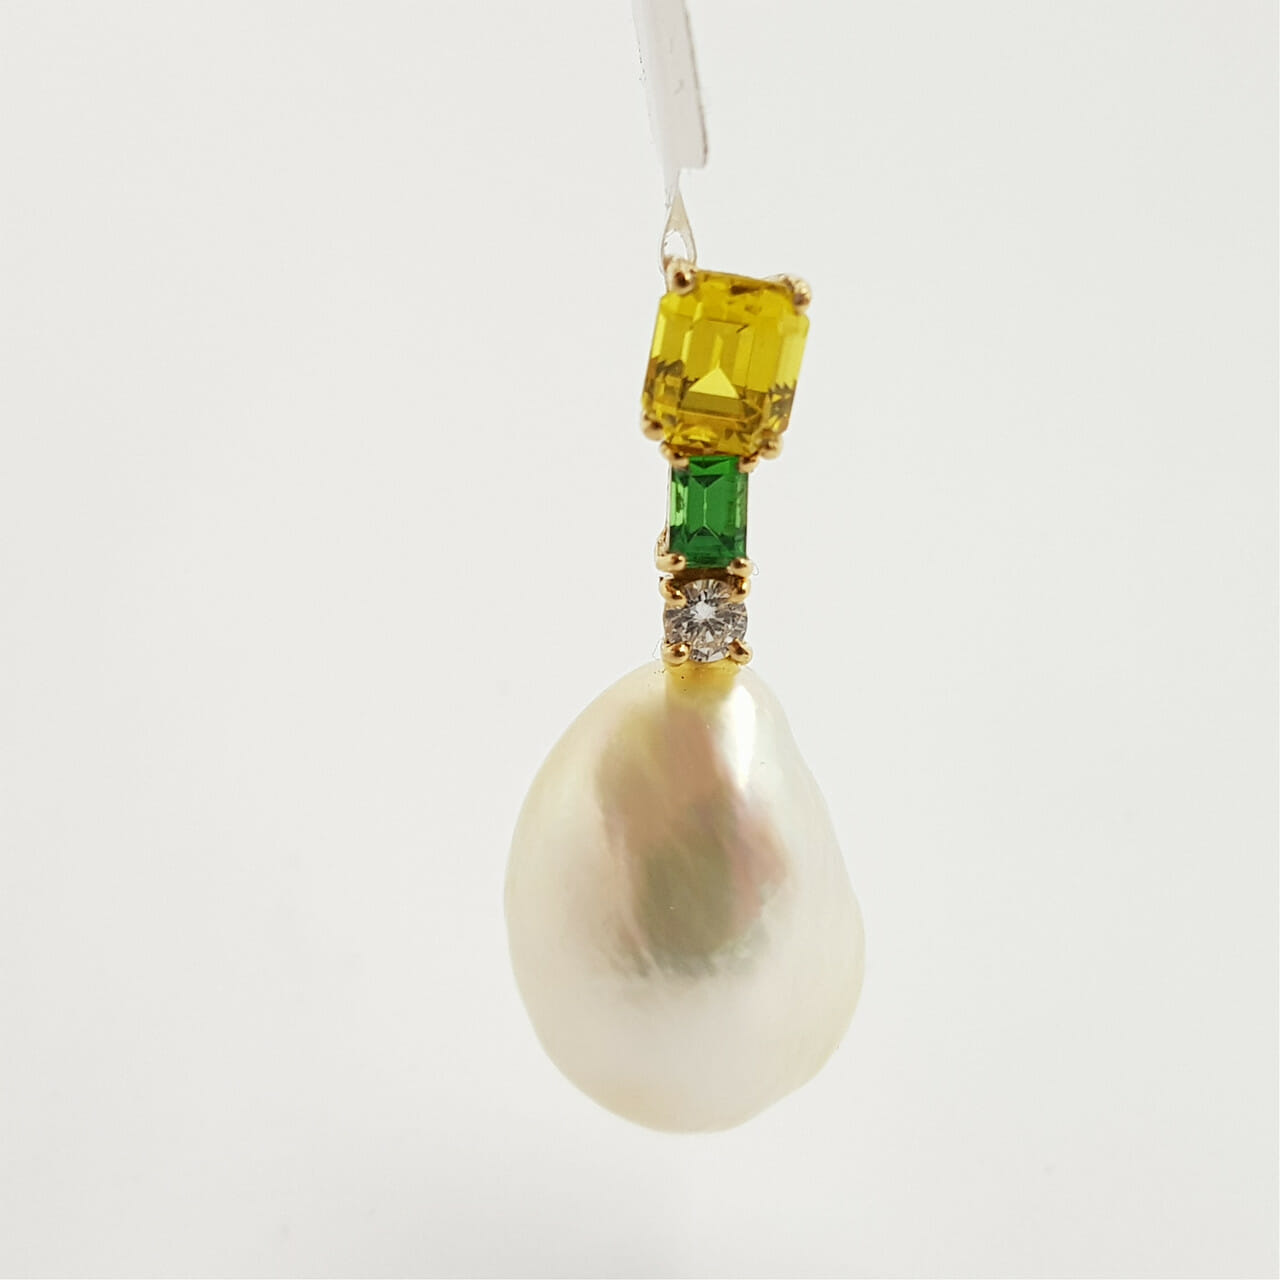 This pendant has been newly made with a trio of stones sitting above a natural pearl, set in 18ct yellow gold.